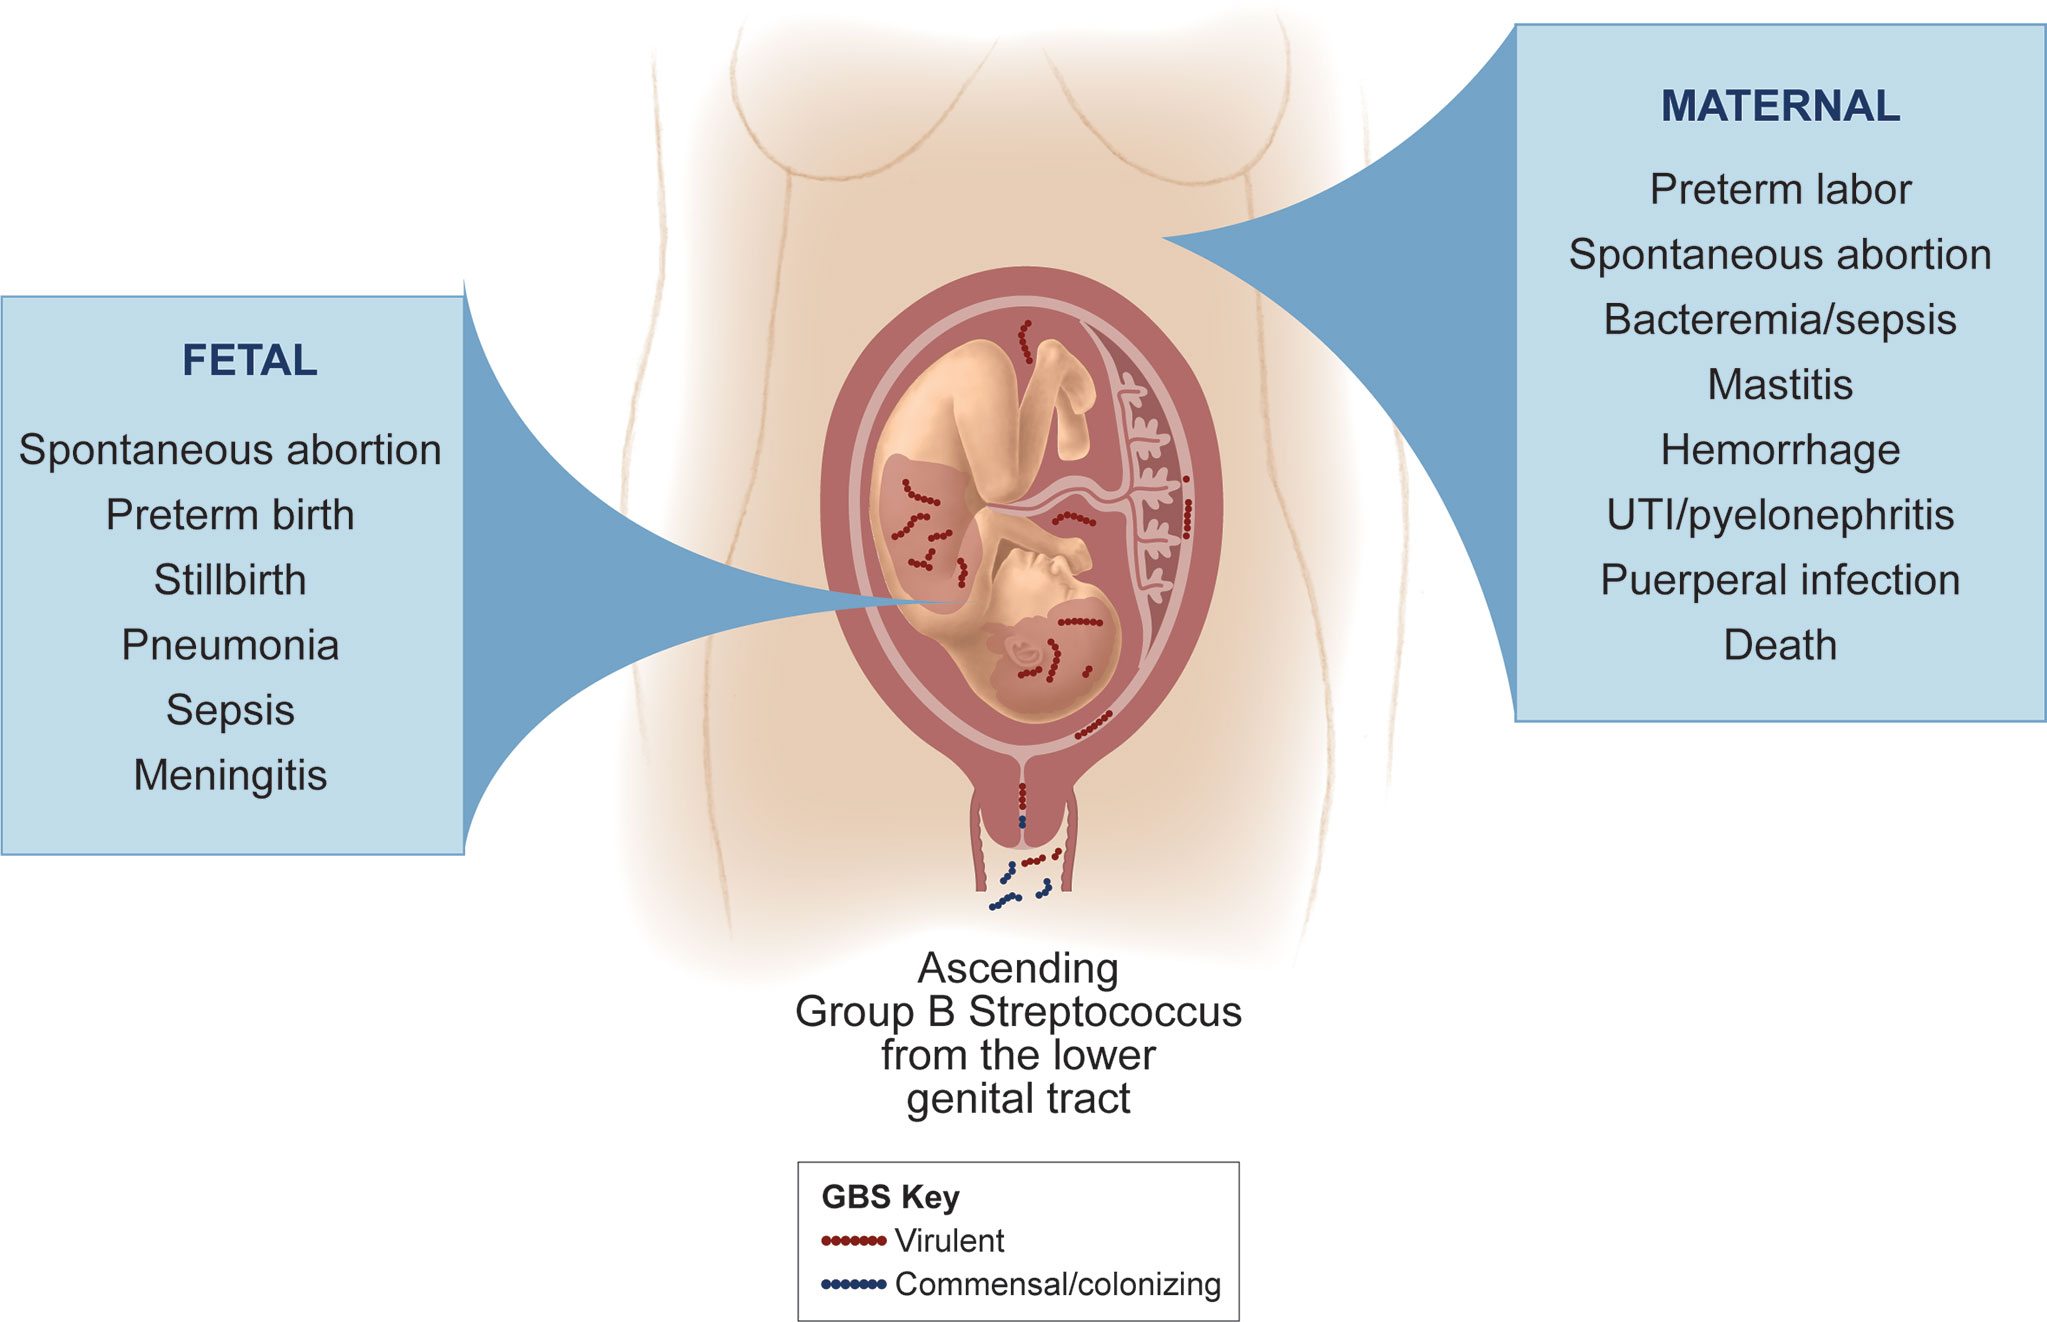 Frontiers Bacterial And Host Determinants Of Group B Streptococcal Vaginal Colonization And Ascending Infection In Pregnancy Cellular And Infection Microbiology